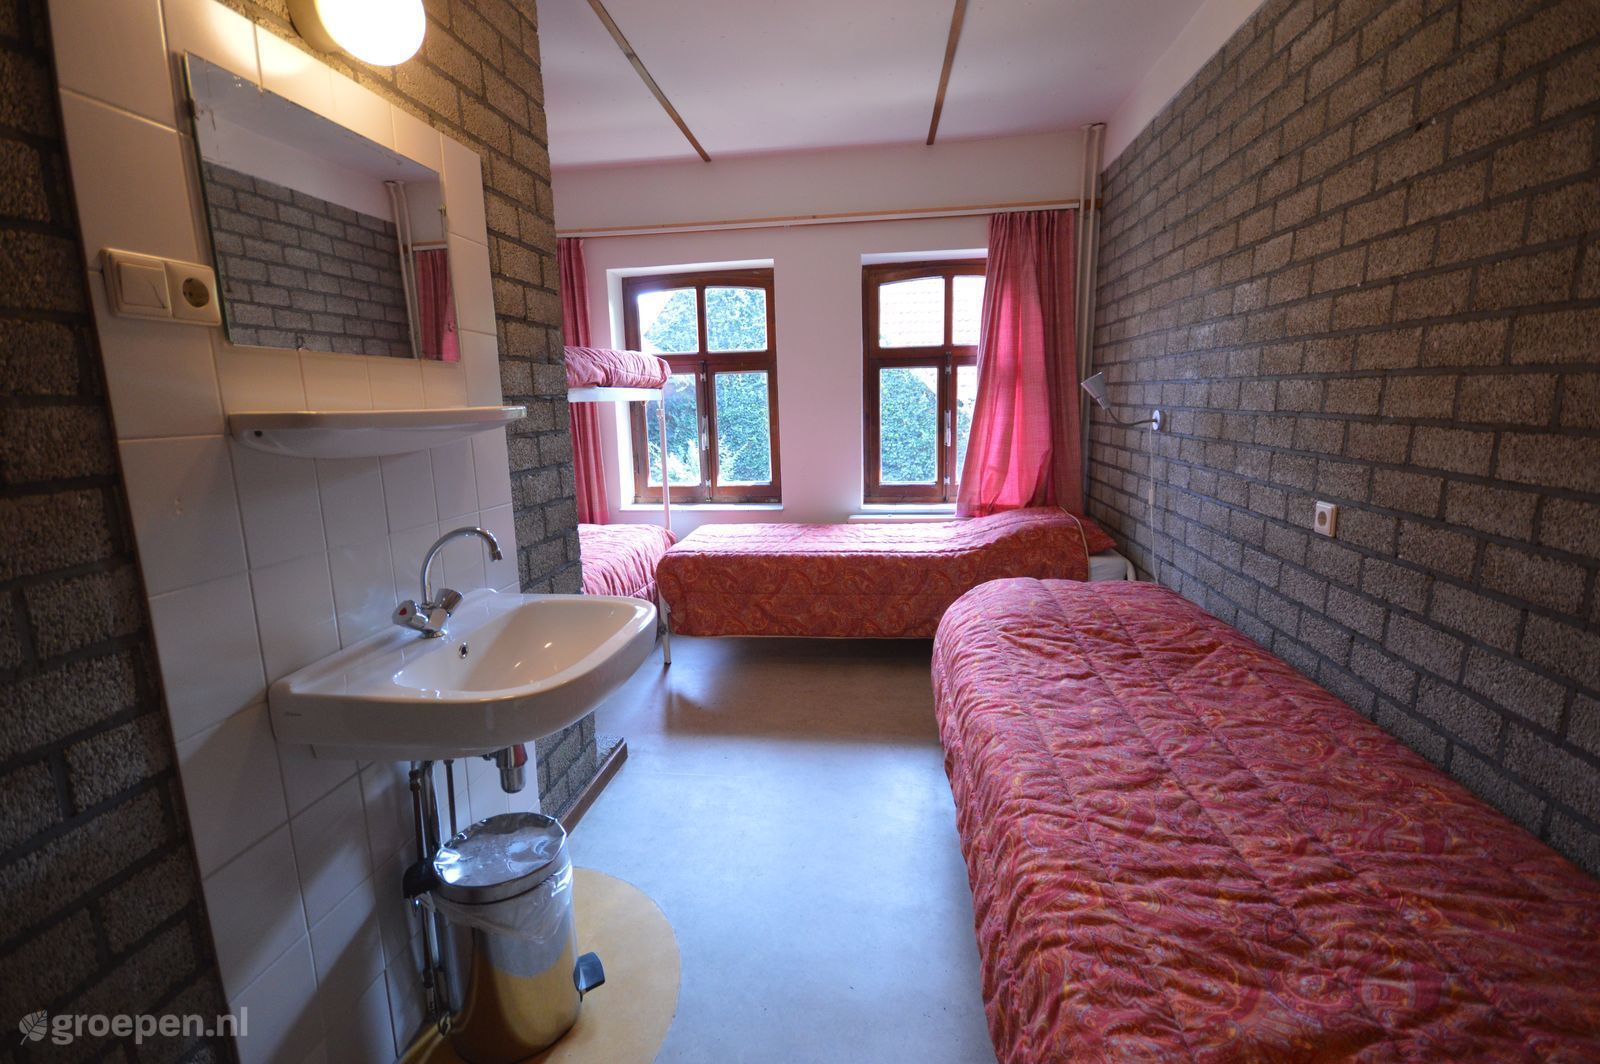 Group accommodation Ransdaal